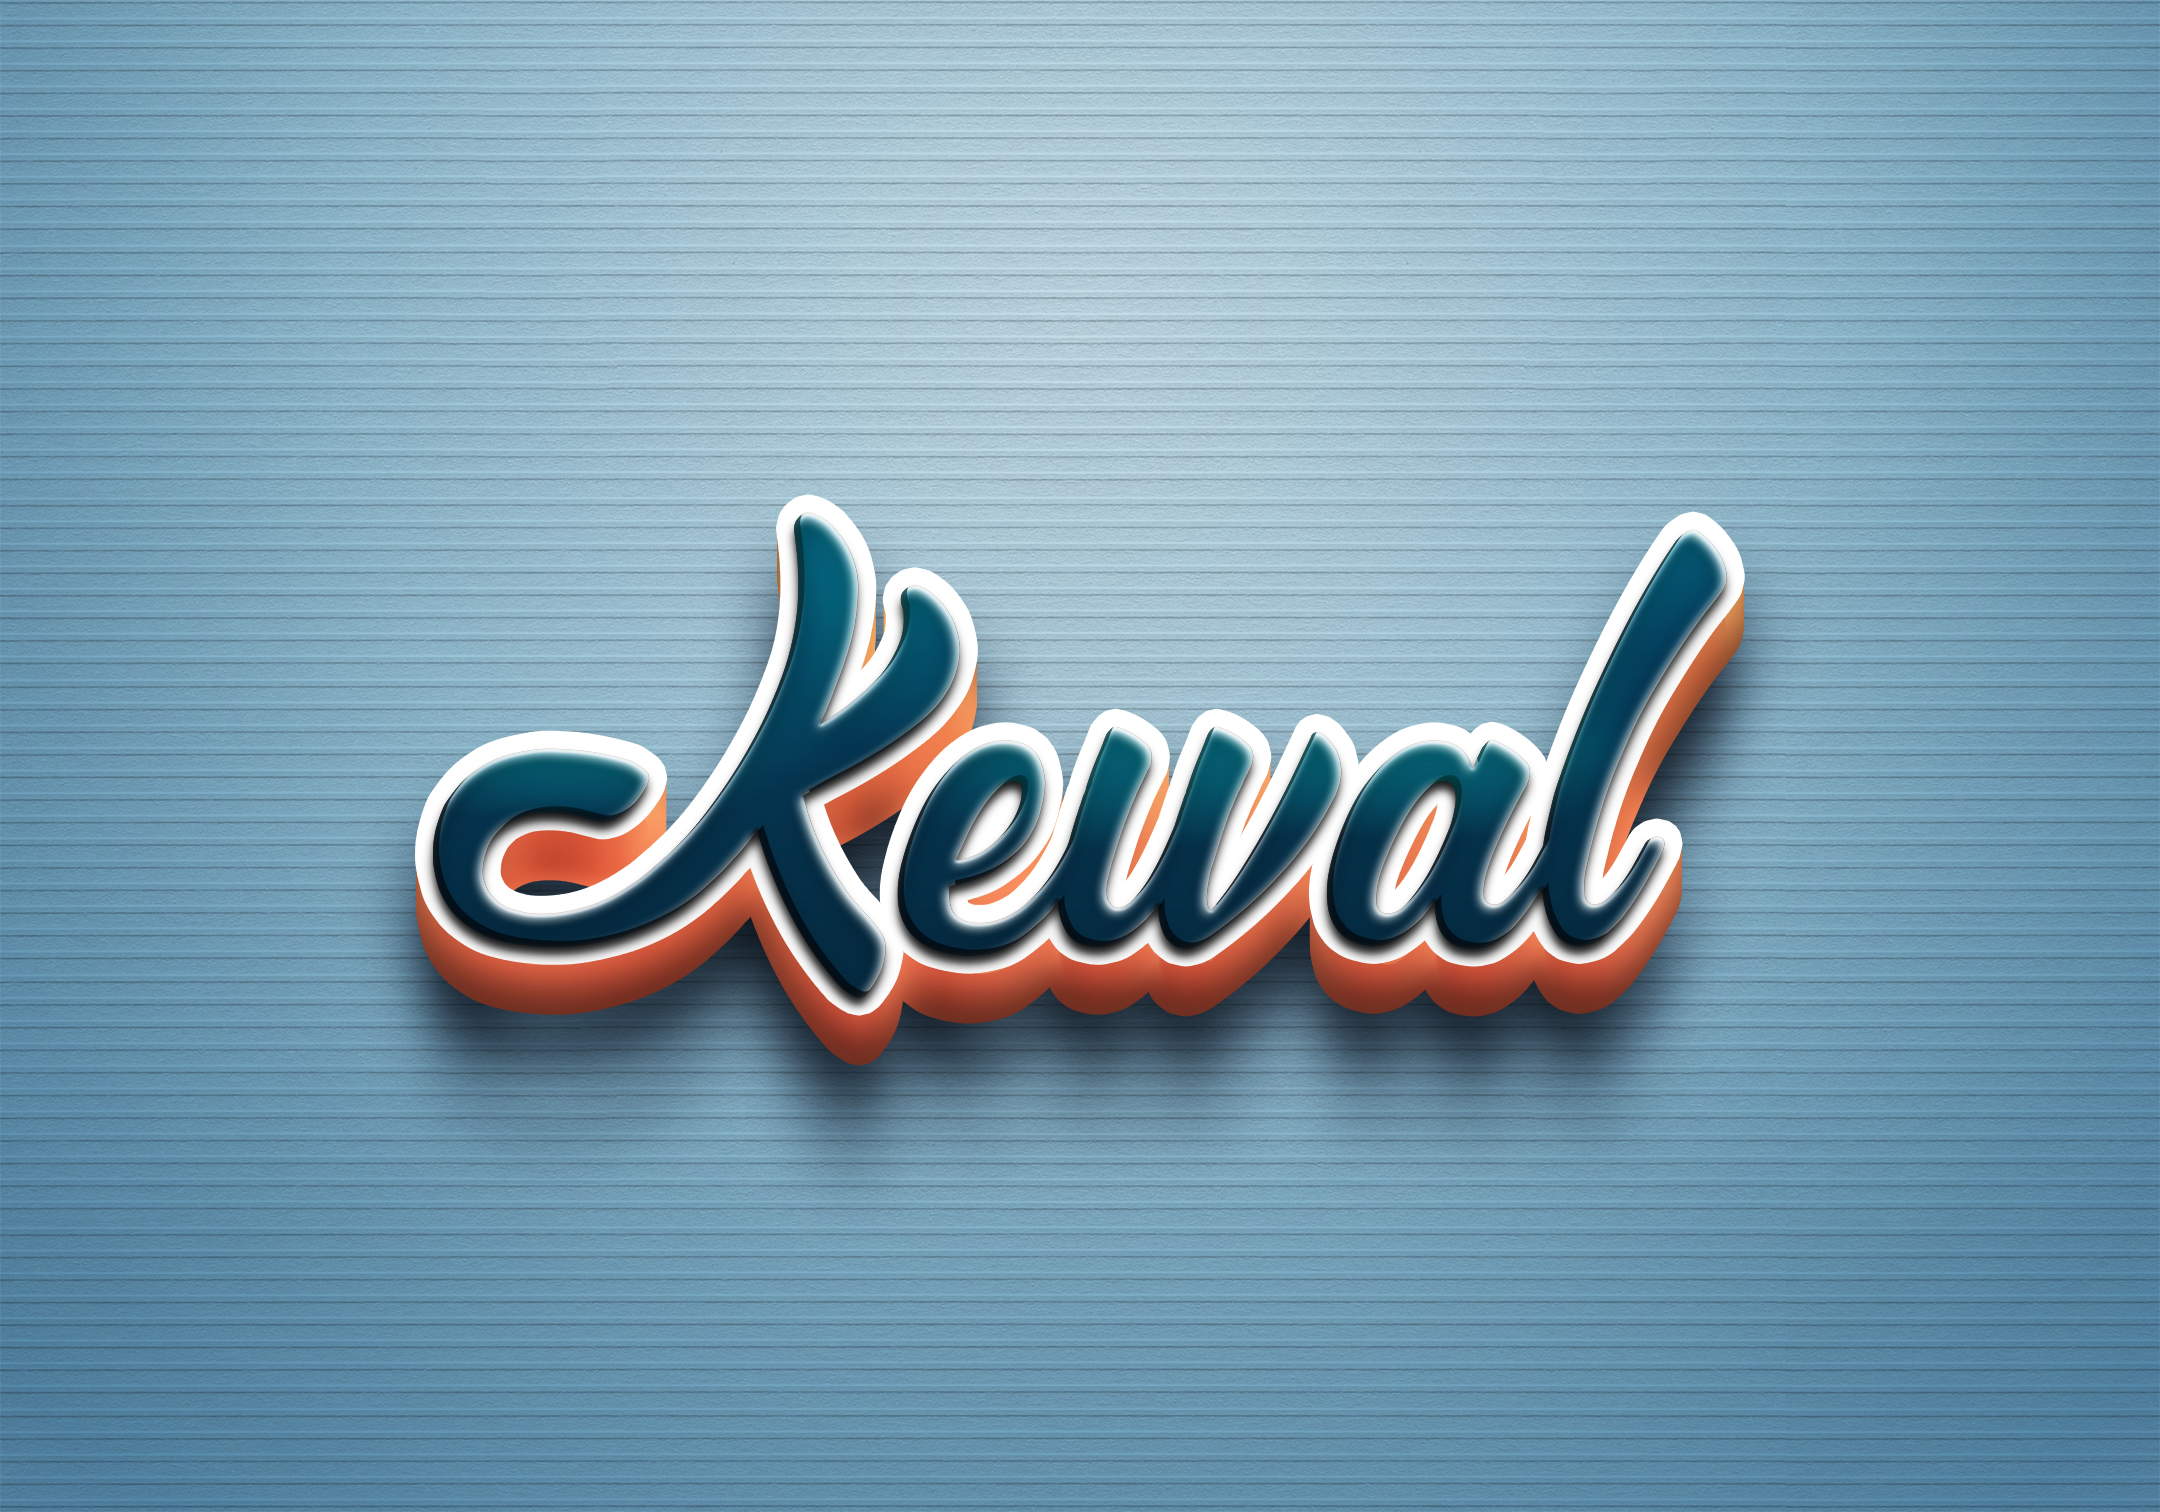 Keval Ghori - 3D character modeling